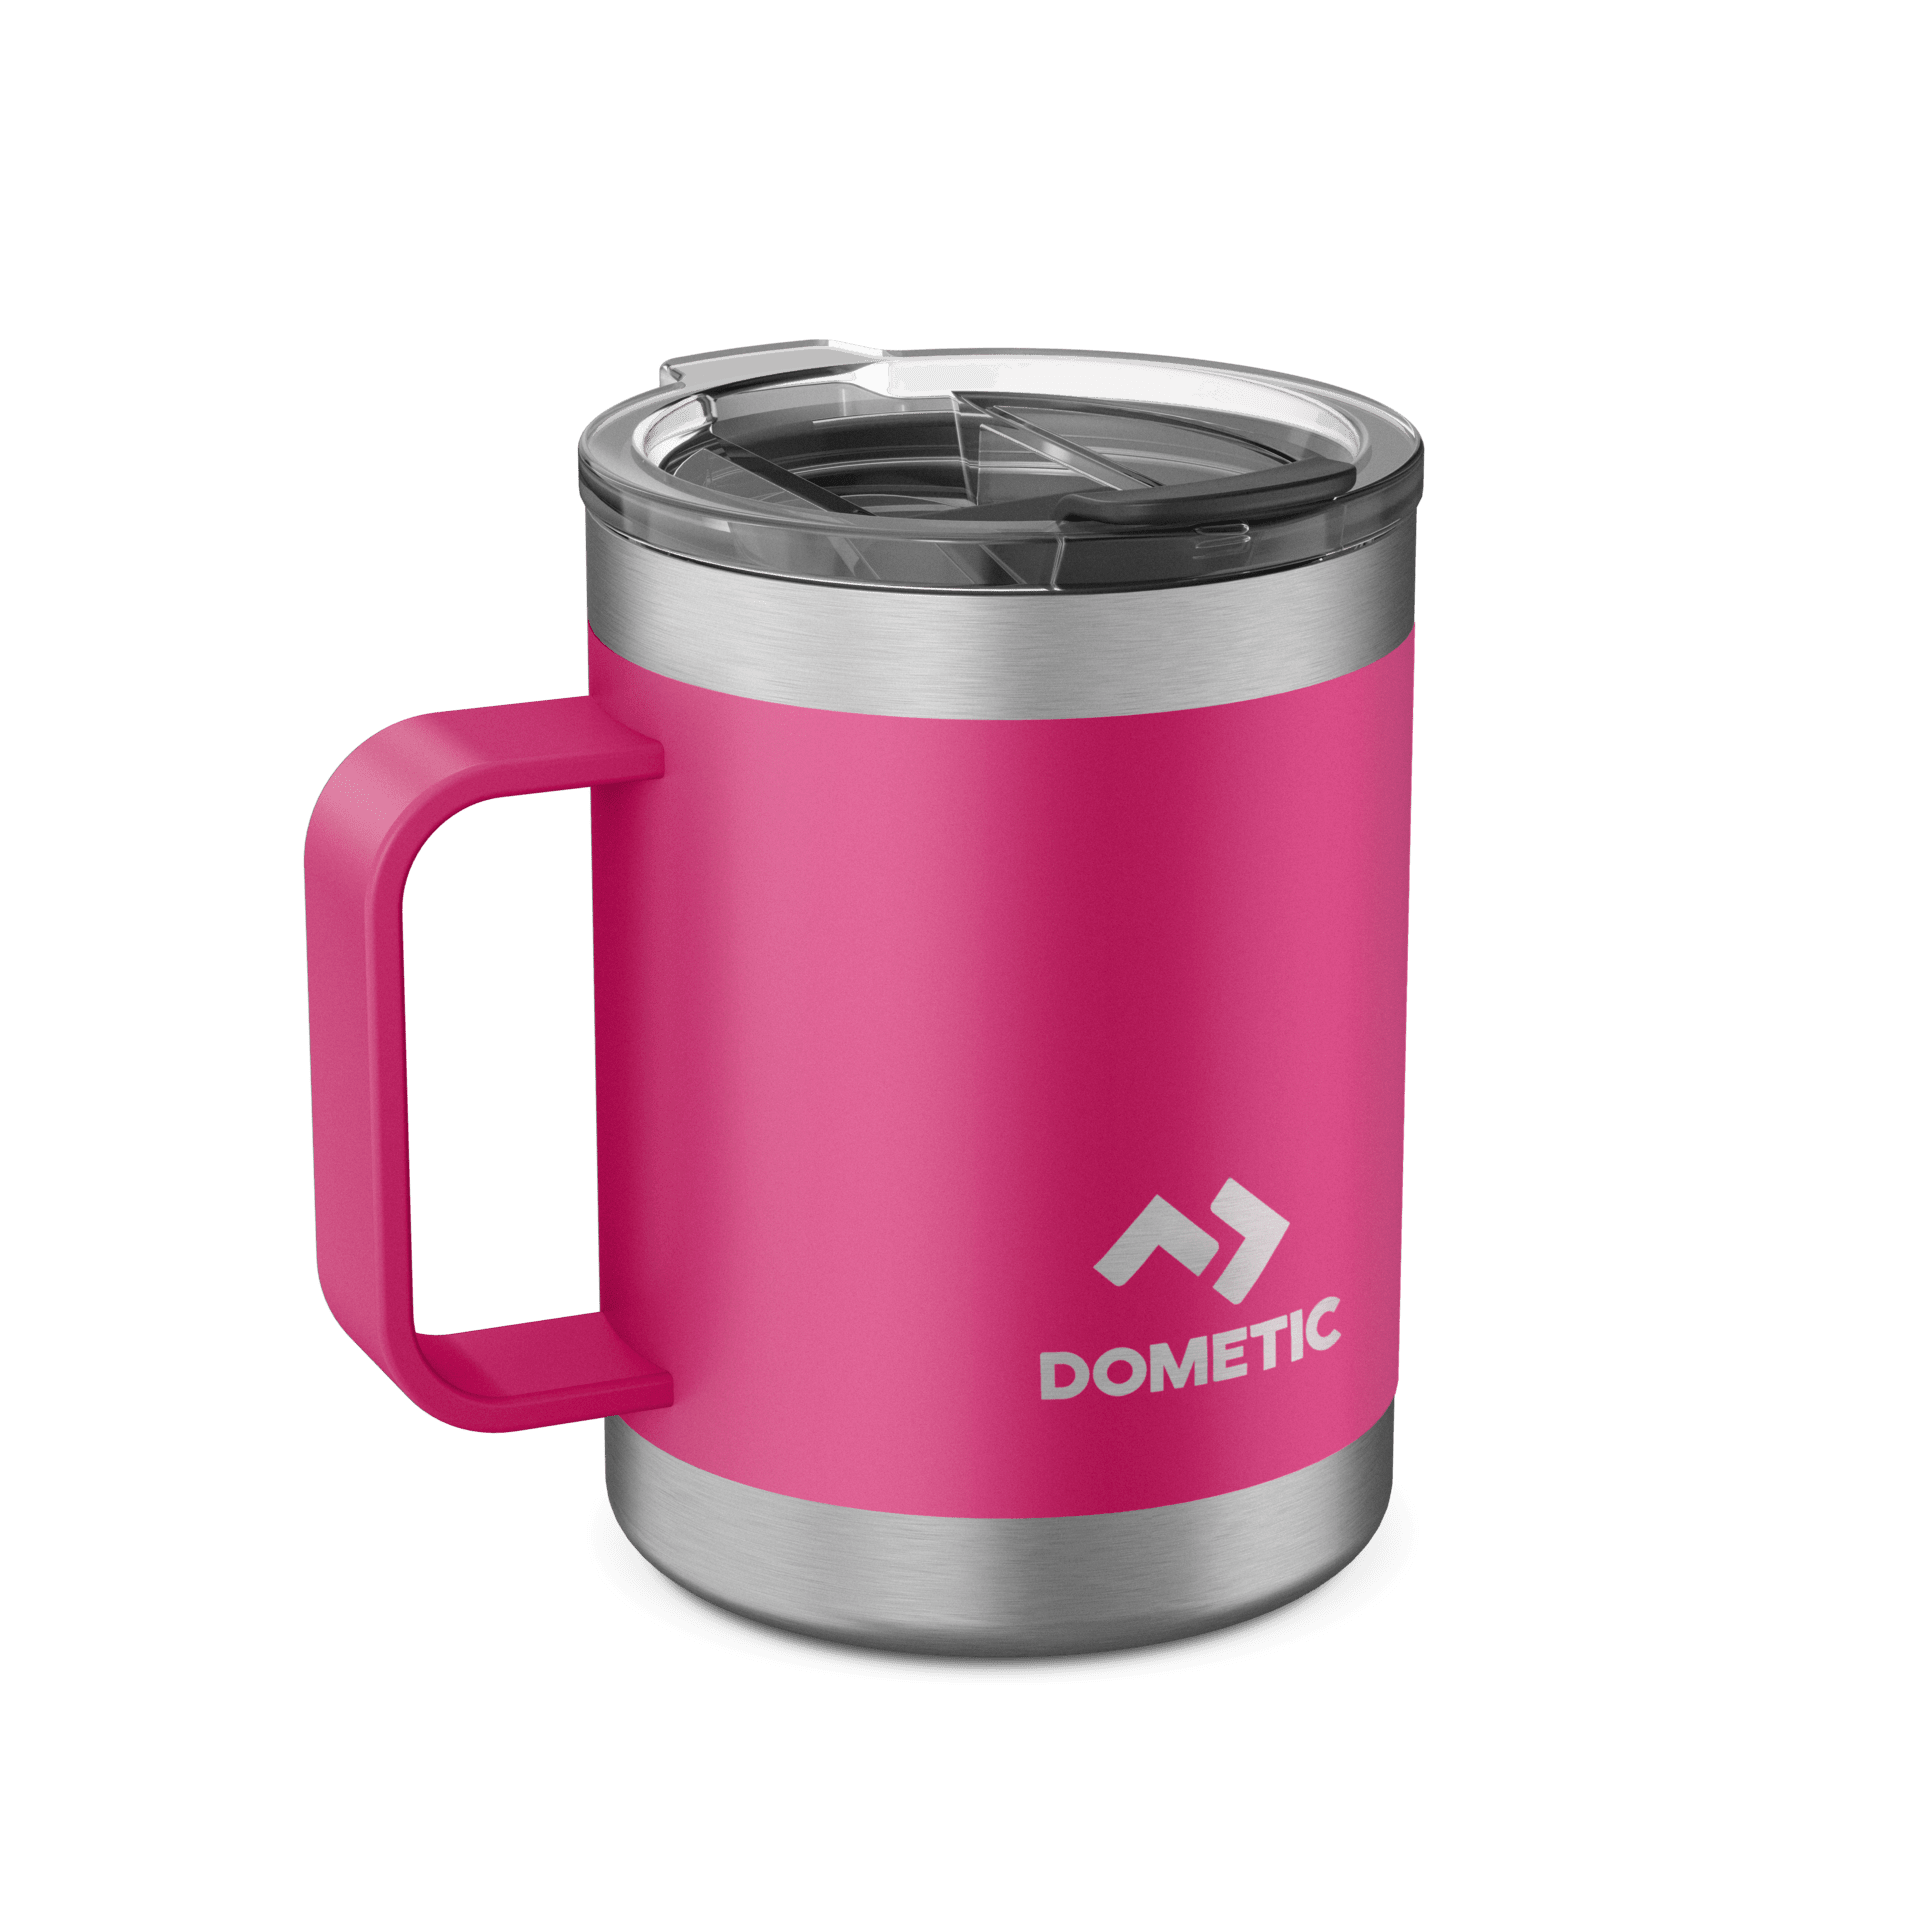 https://www.dometic.com/externalassets/dometic-thermo-mug-45_9600050956_97361.png?ref=2100725689